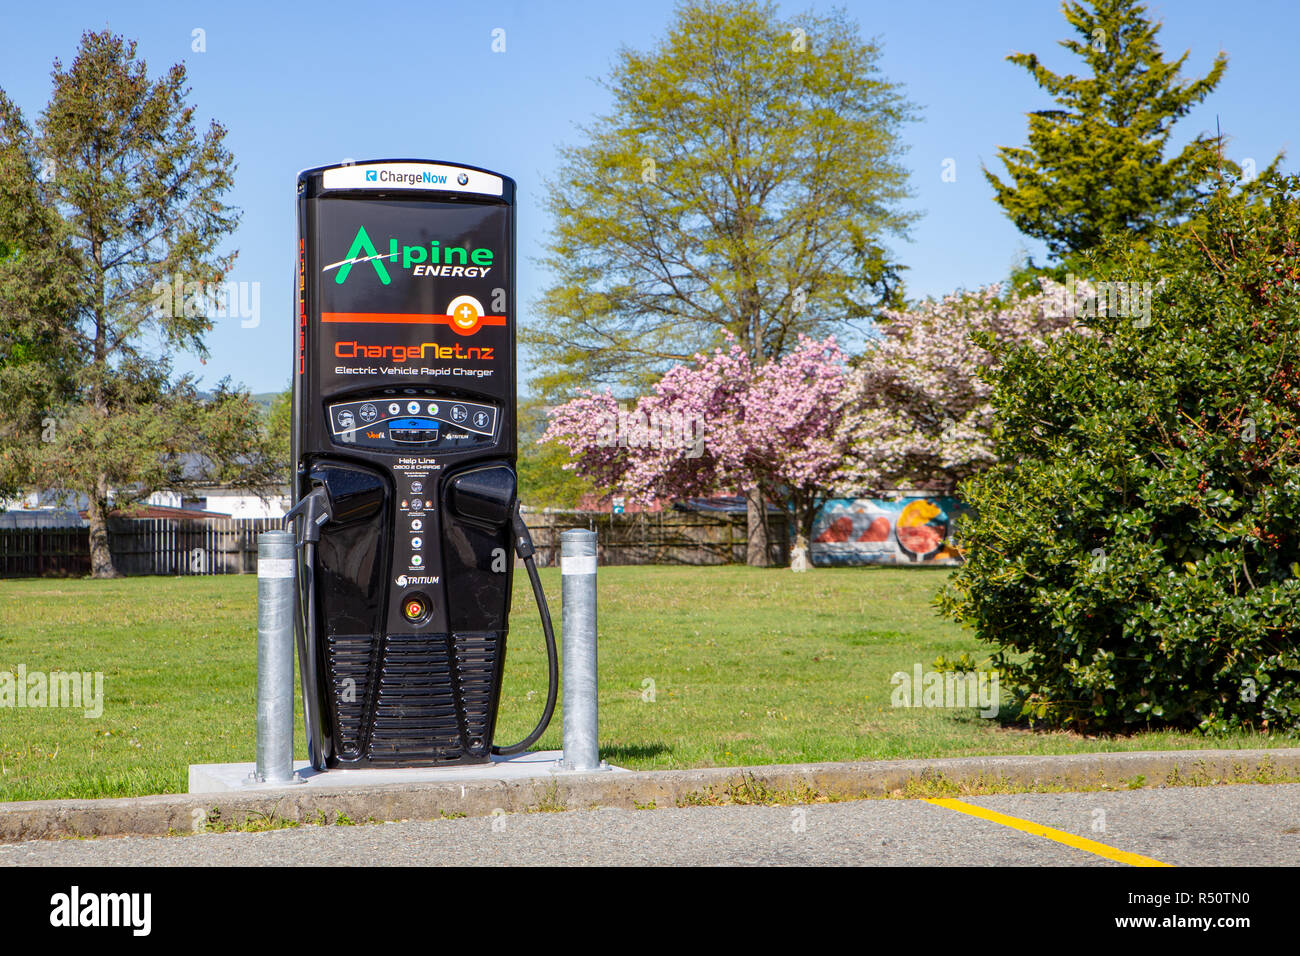 Lake Tekapo, Canterbury, New Zealand - October 21 2018: Rapid car charger station for electric cars Stock Photo